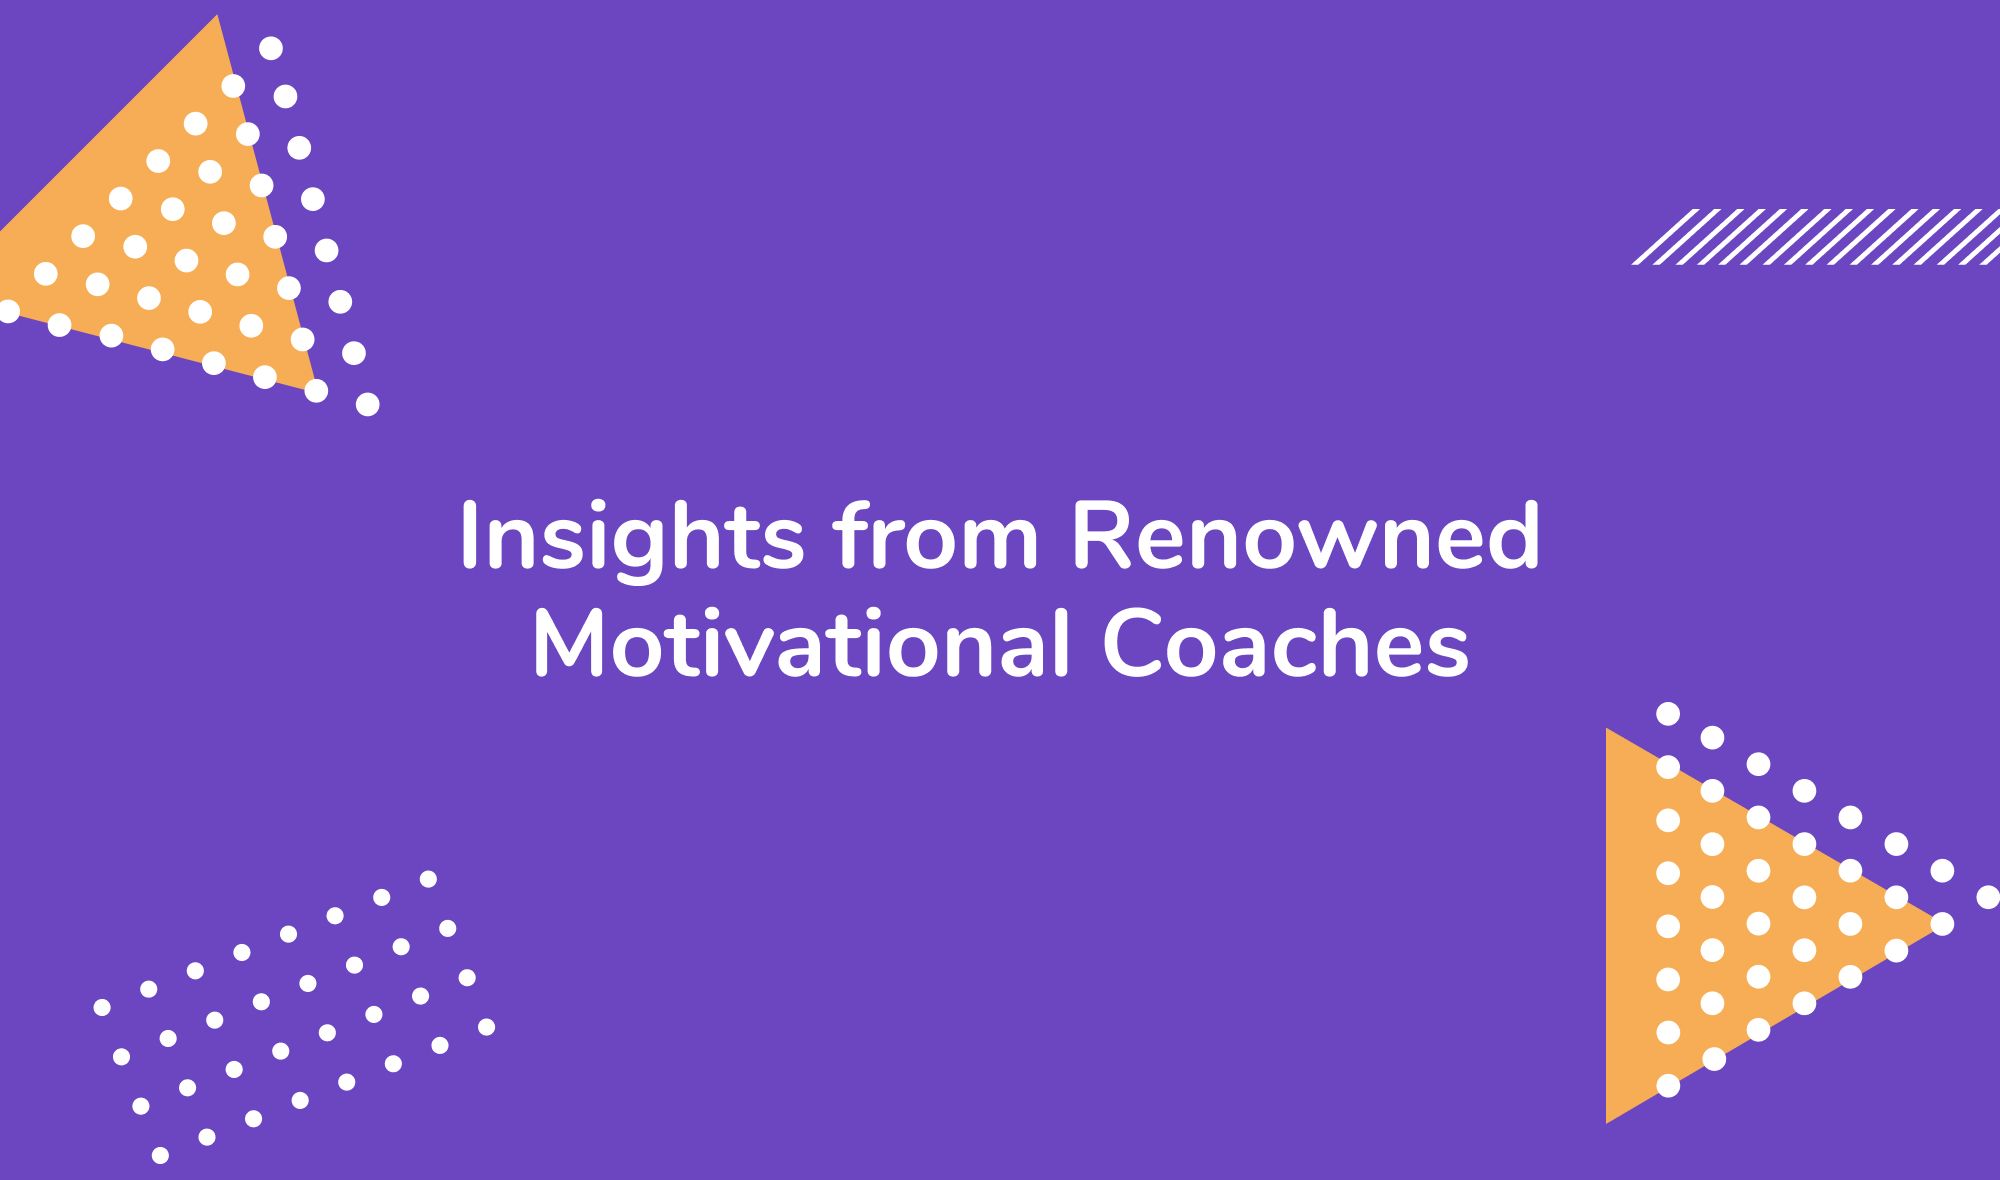 Insights from Renowned Motivational Coaches